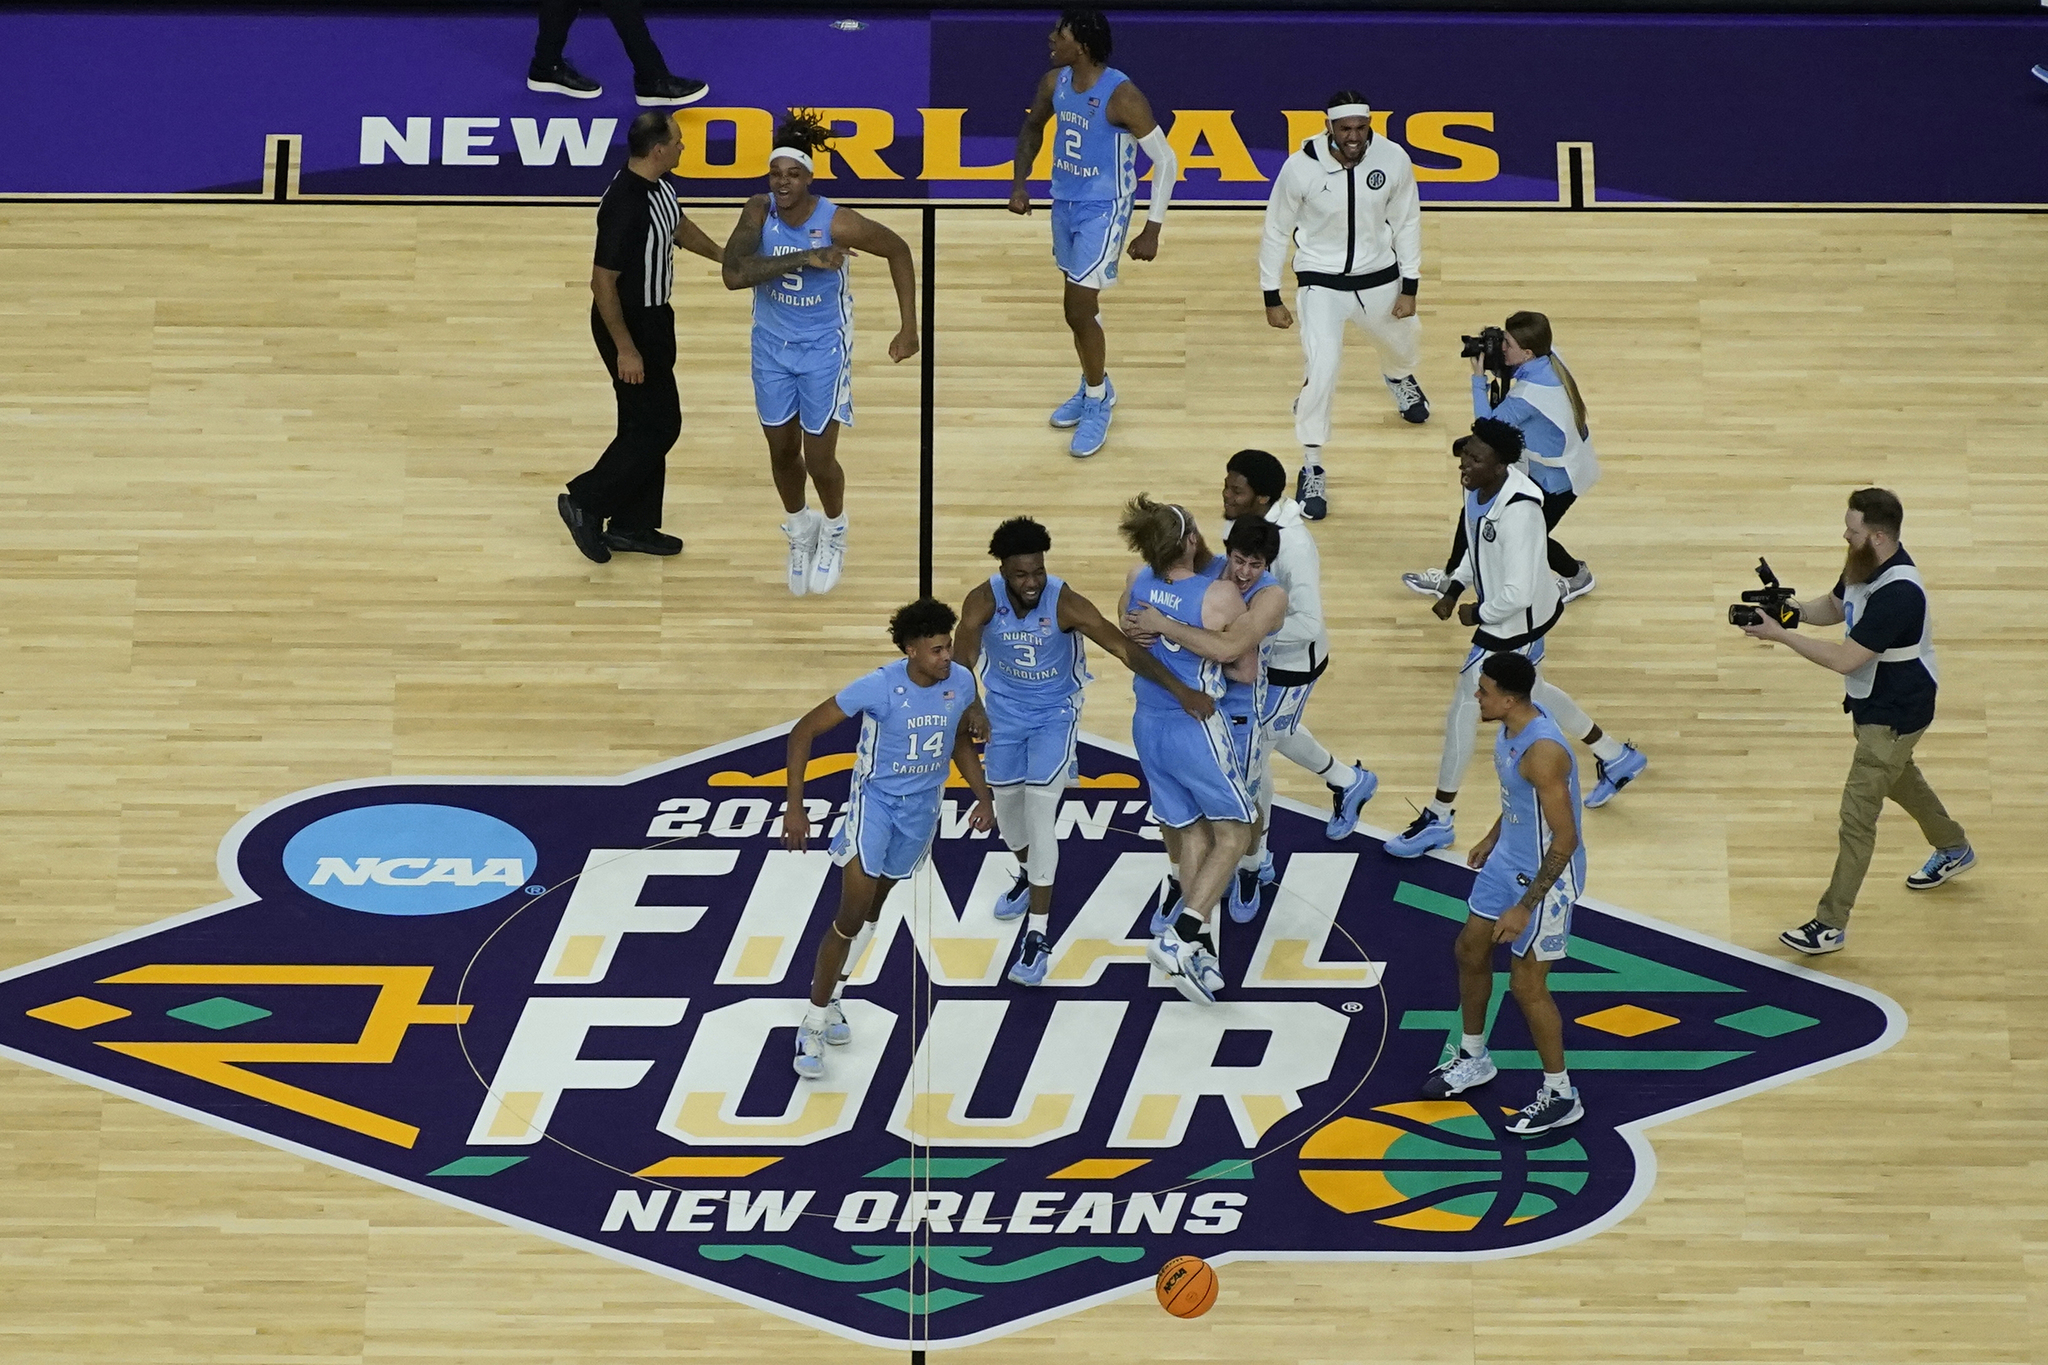 North Carolina players celebrate their victory over the Duke.